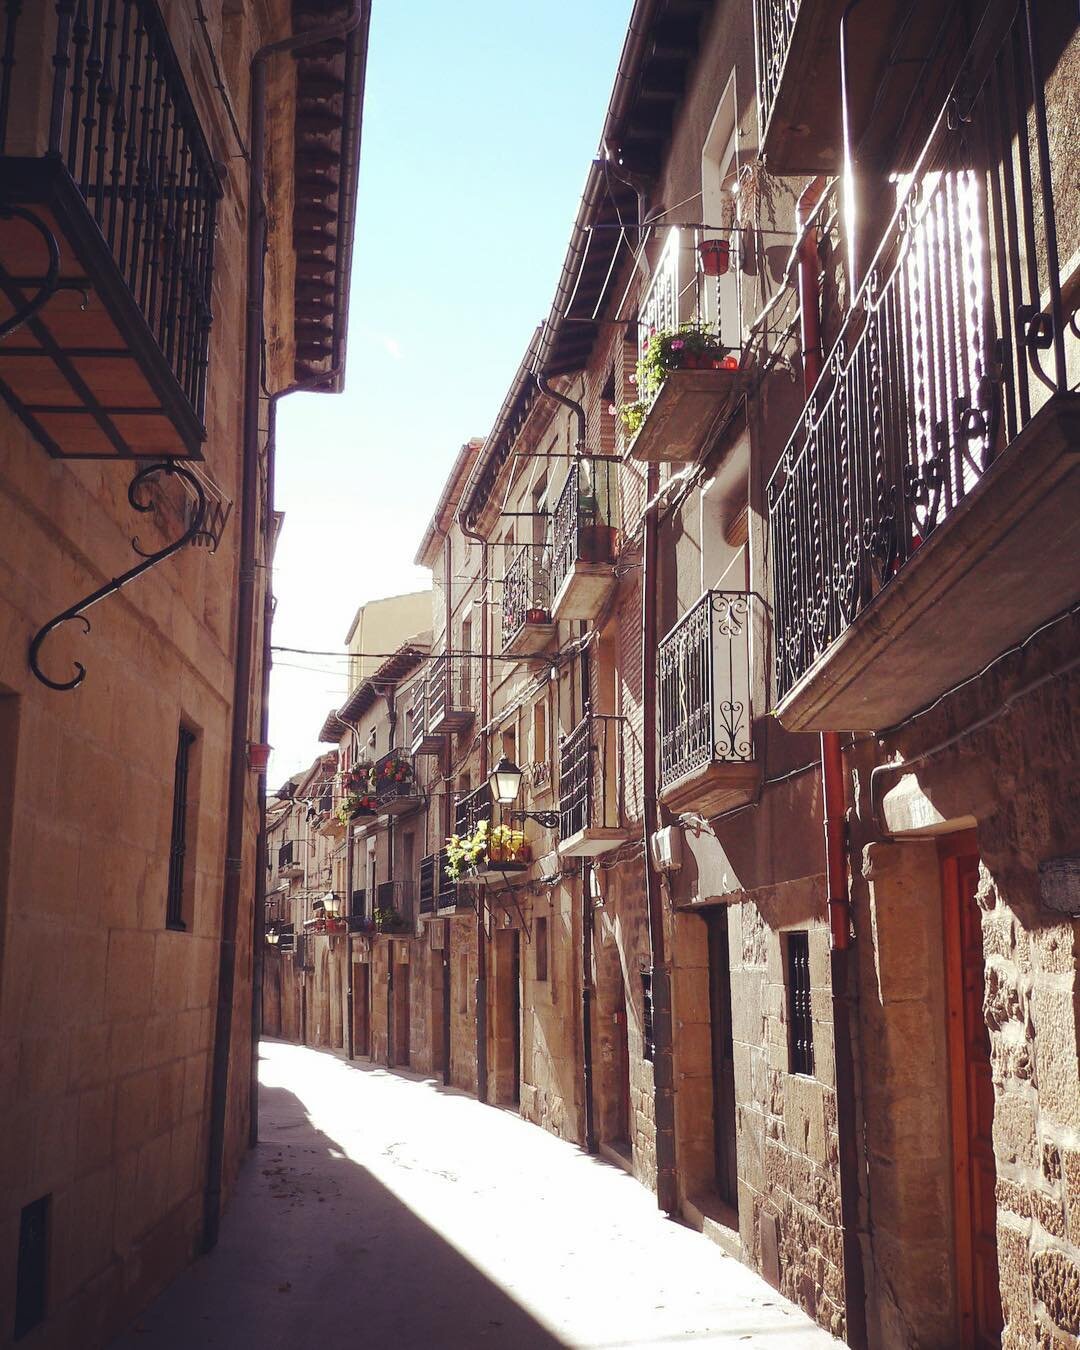 A time before cars in town of Laguardia #laguardia #rioja #spain #travel #traveling